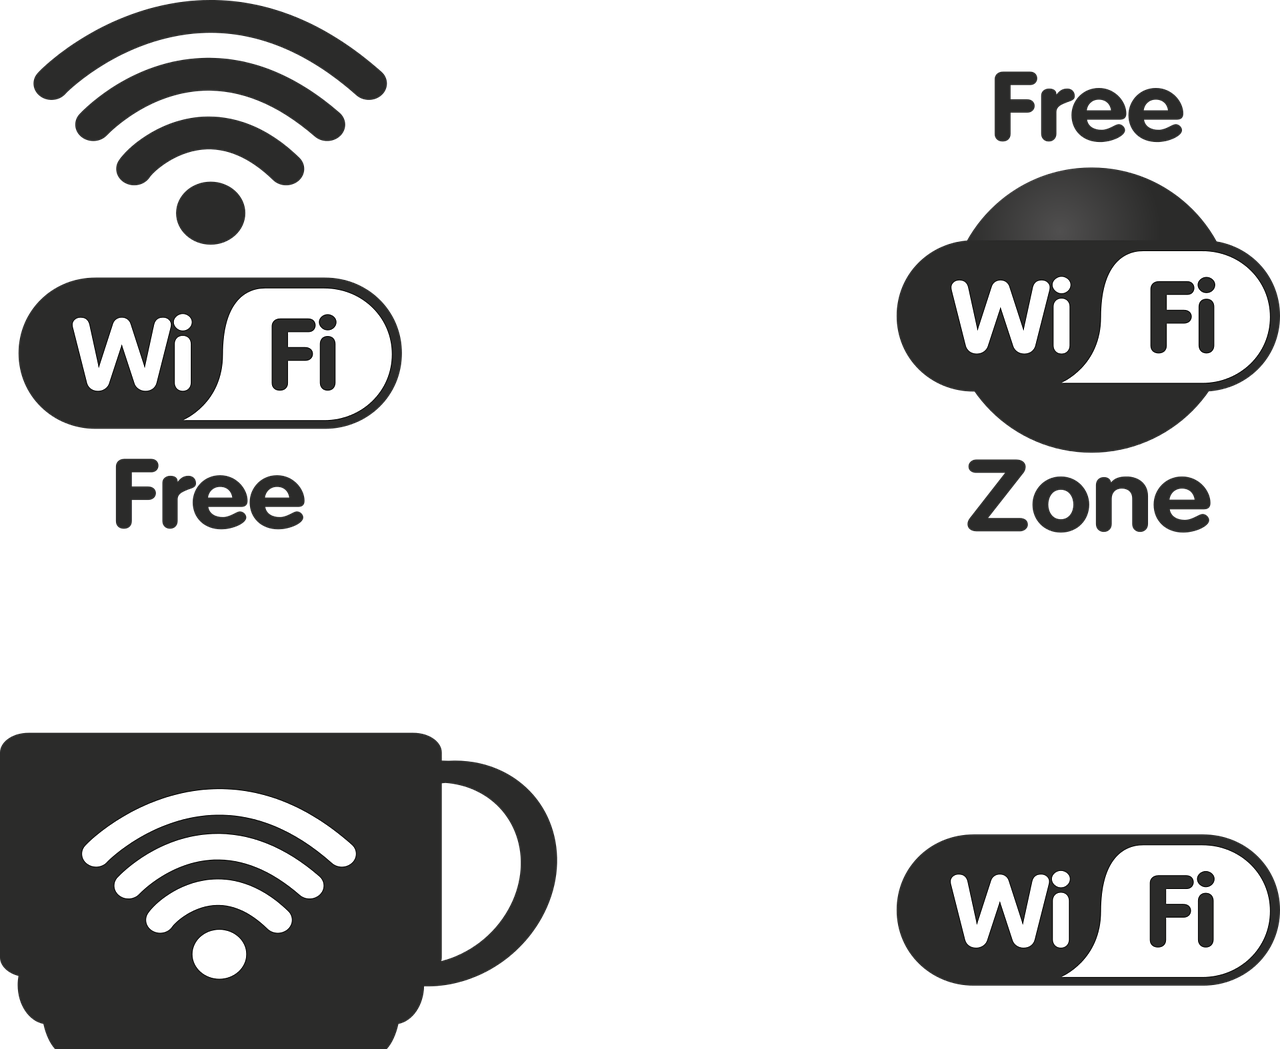 Stylized icons that indicate free WiFi is available